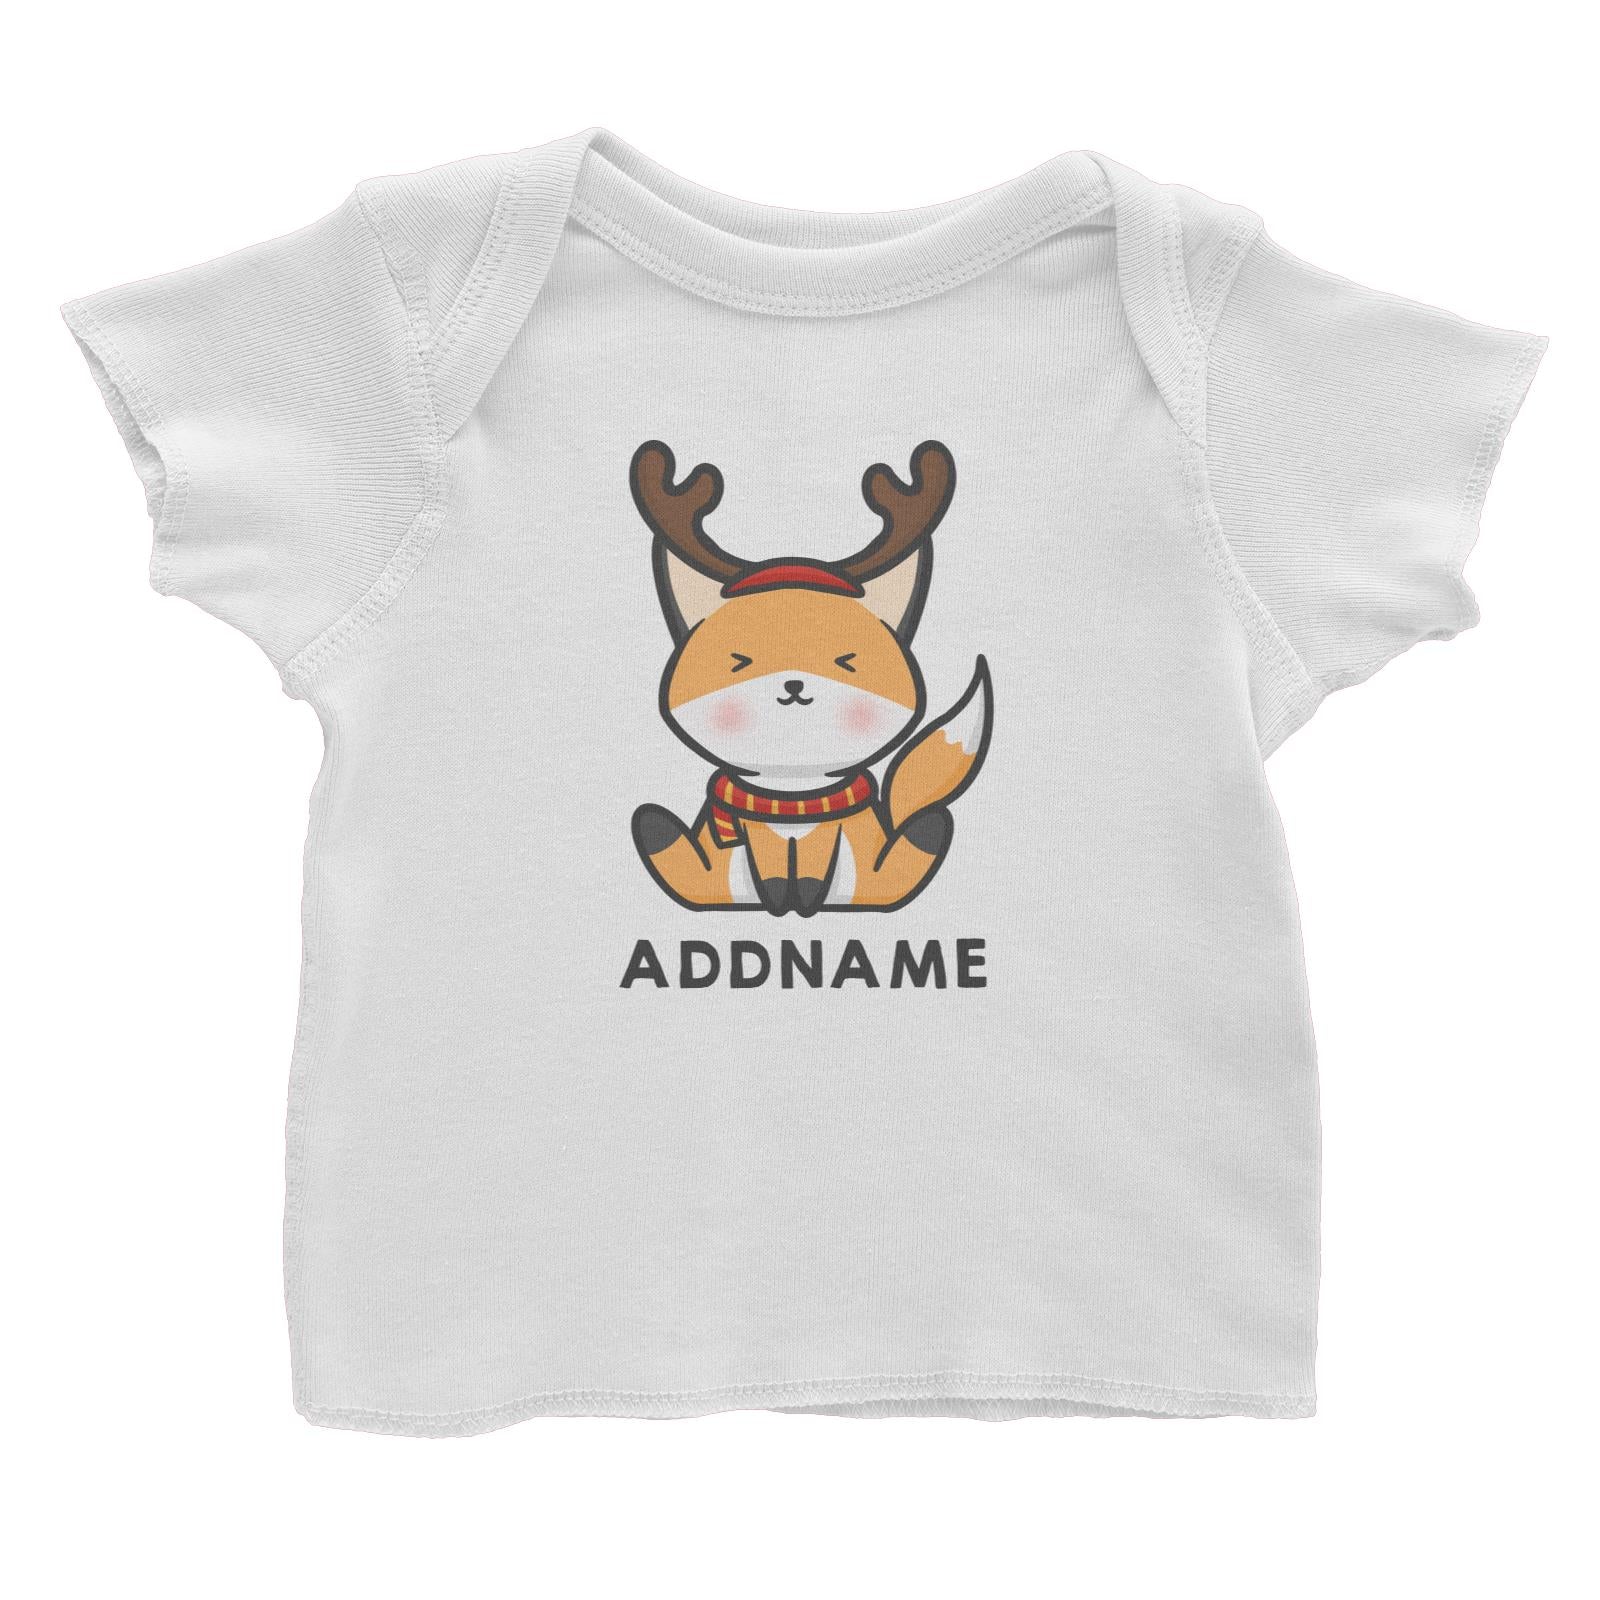 Xmas Cute Fox With Reindeer Antlers Addname Accessories Baby T-Shirt